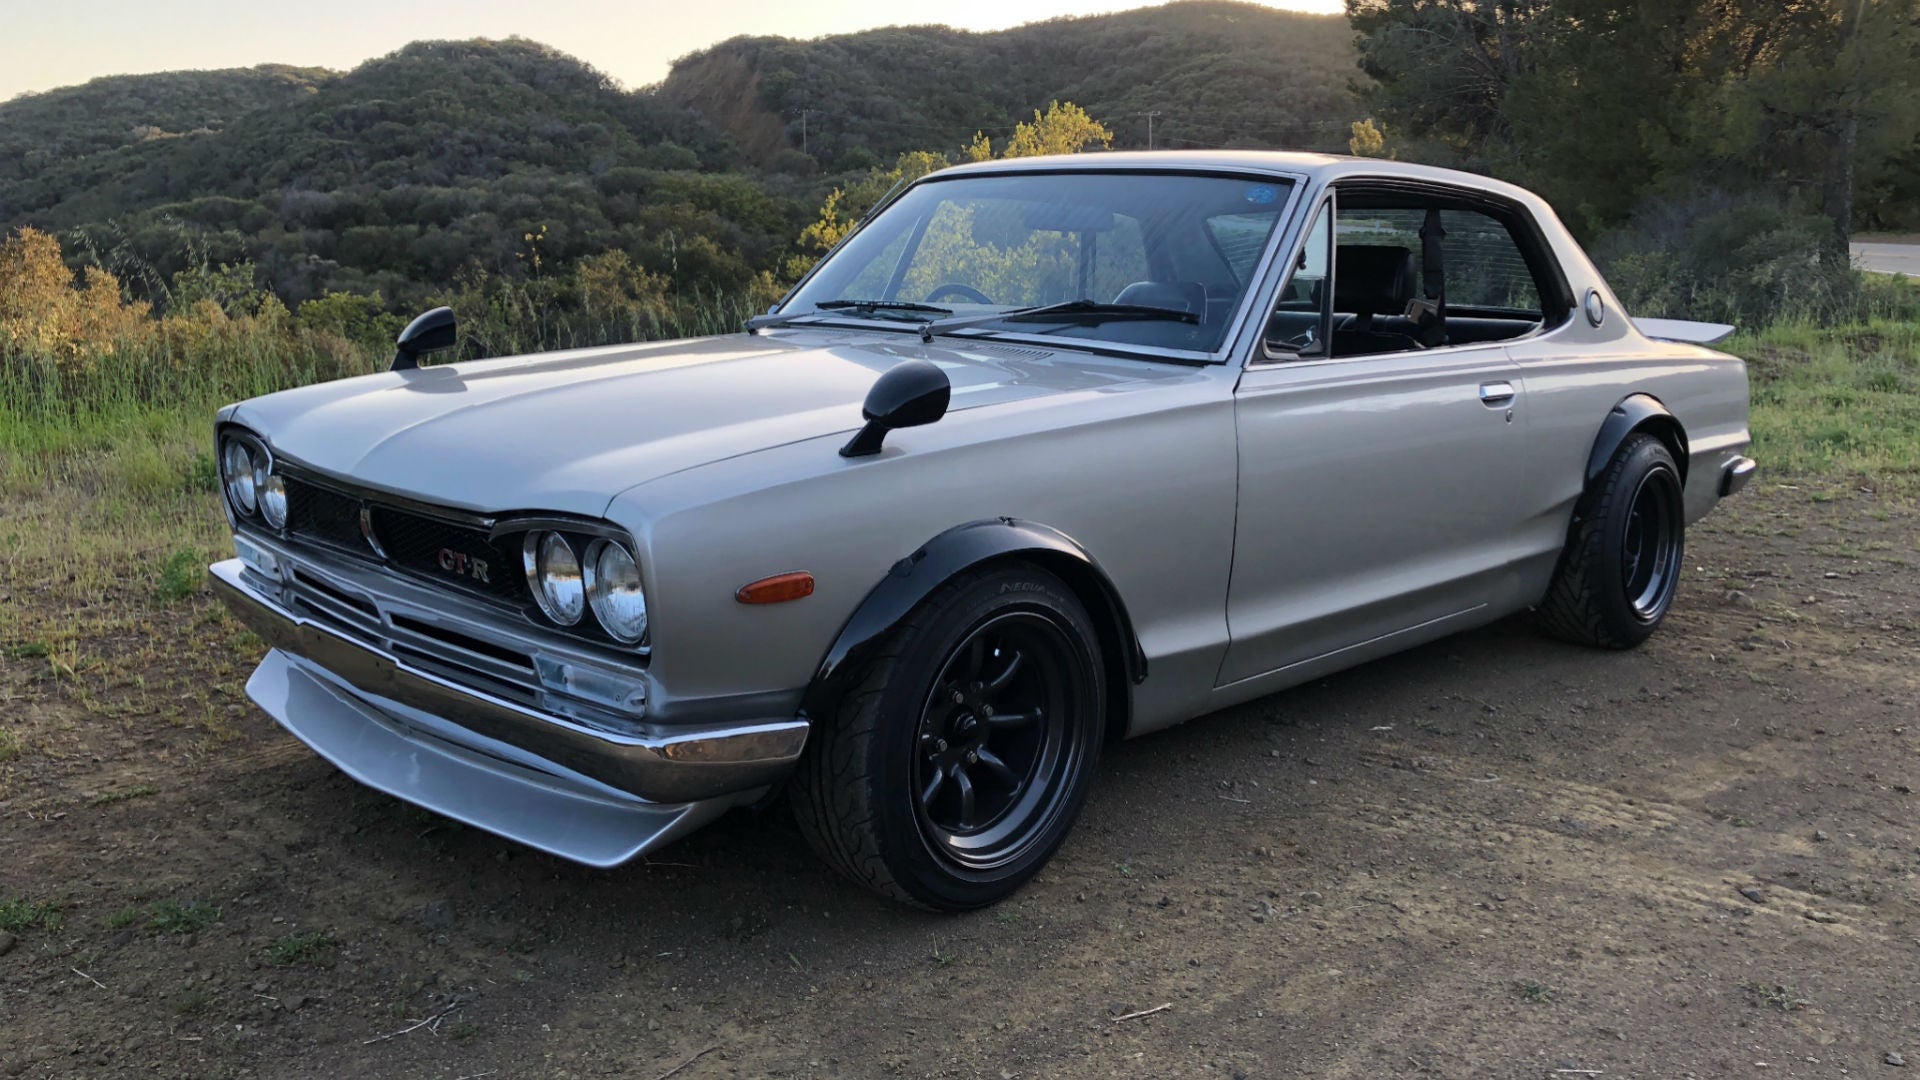 This 1972 Nissan Skyline 2000 GT Is a Great GT-R Imitator | The Drive